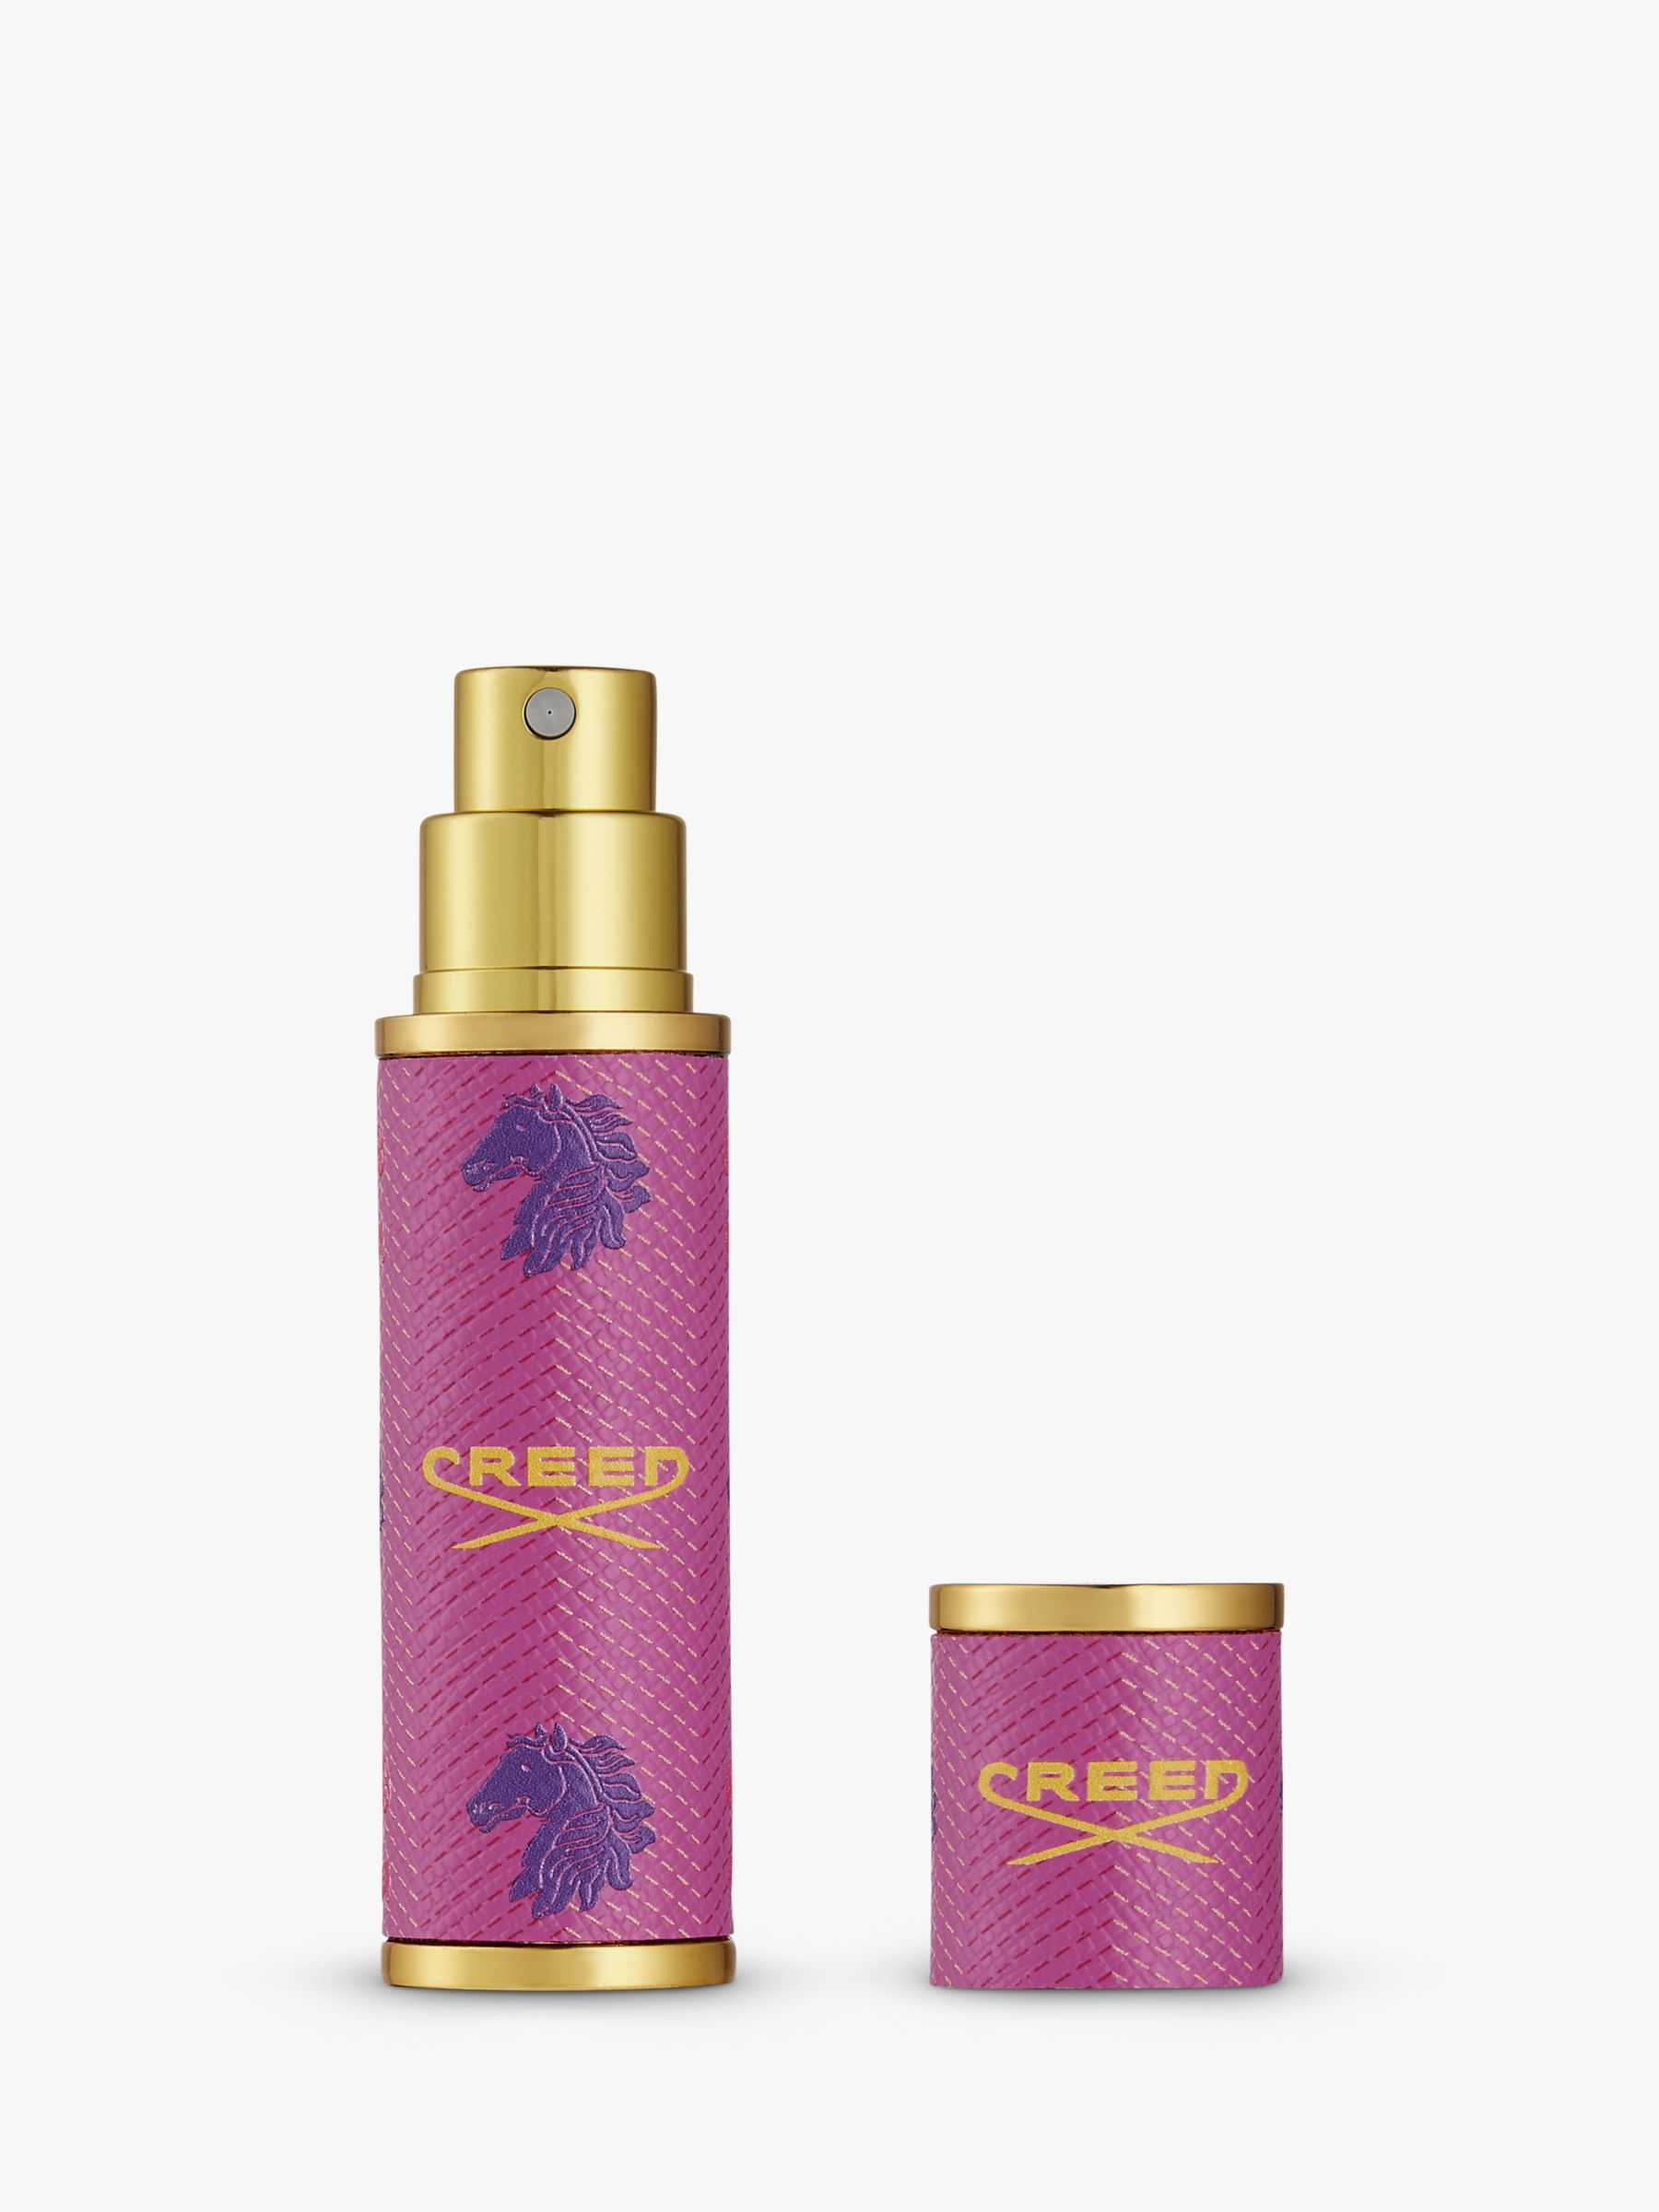 CREED Aventus Cologne, 50ml at John Lewis & Partners